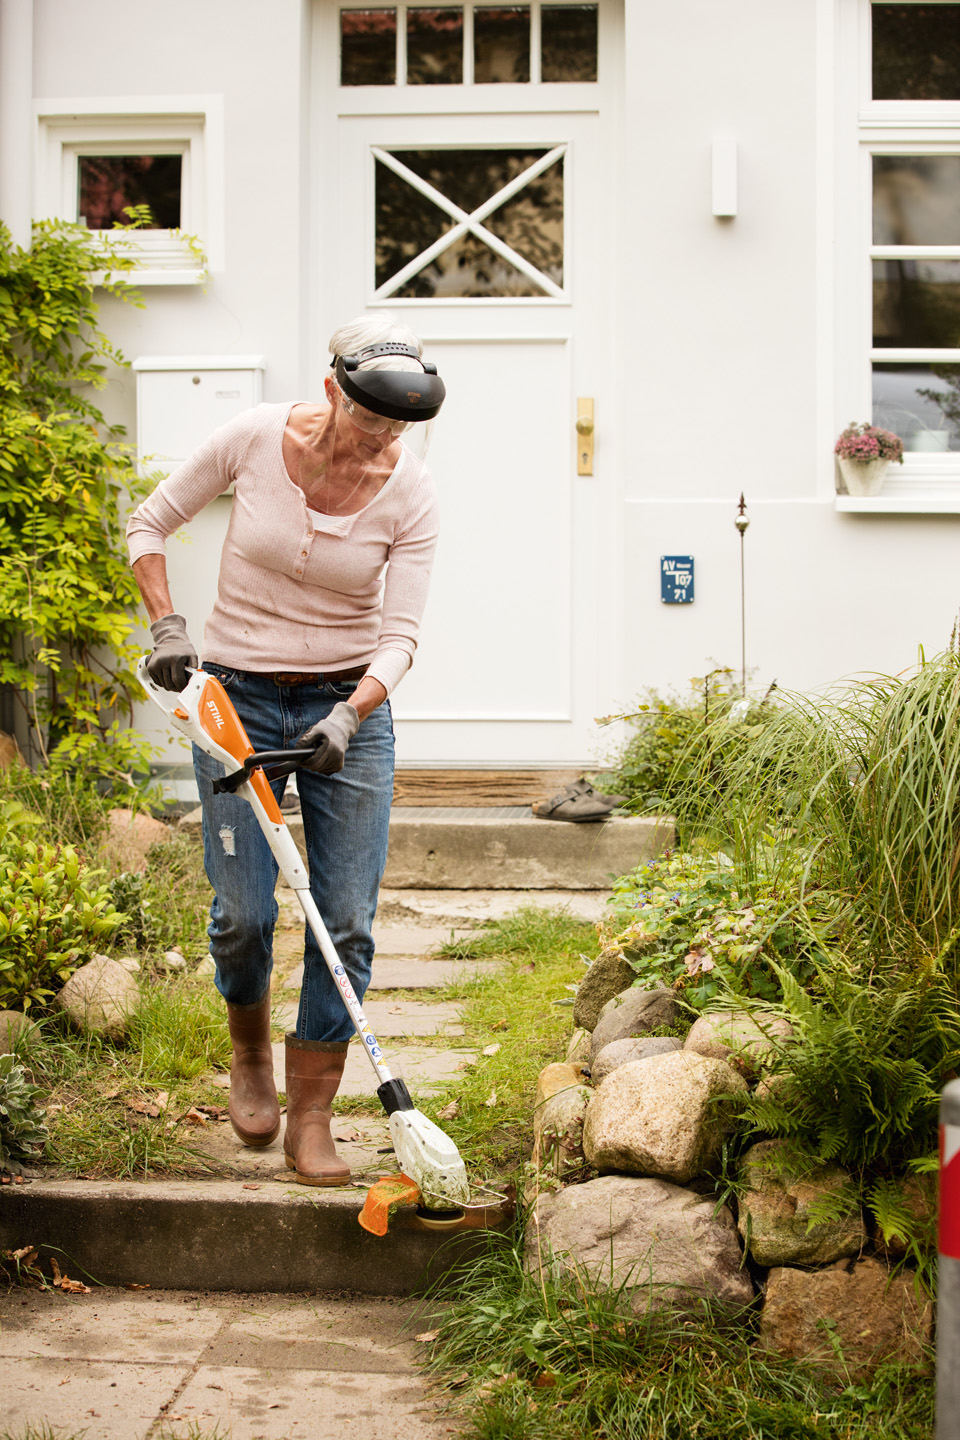 A woman wearing face protection using the STIHL FSA 45 cordless grass trimmer to  trim grass on a step in front of a house